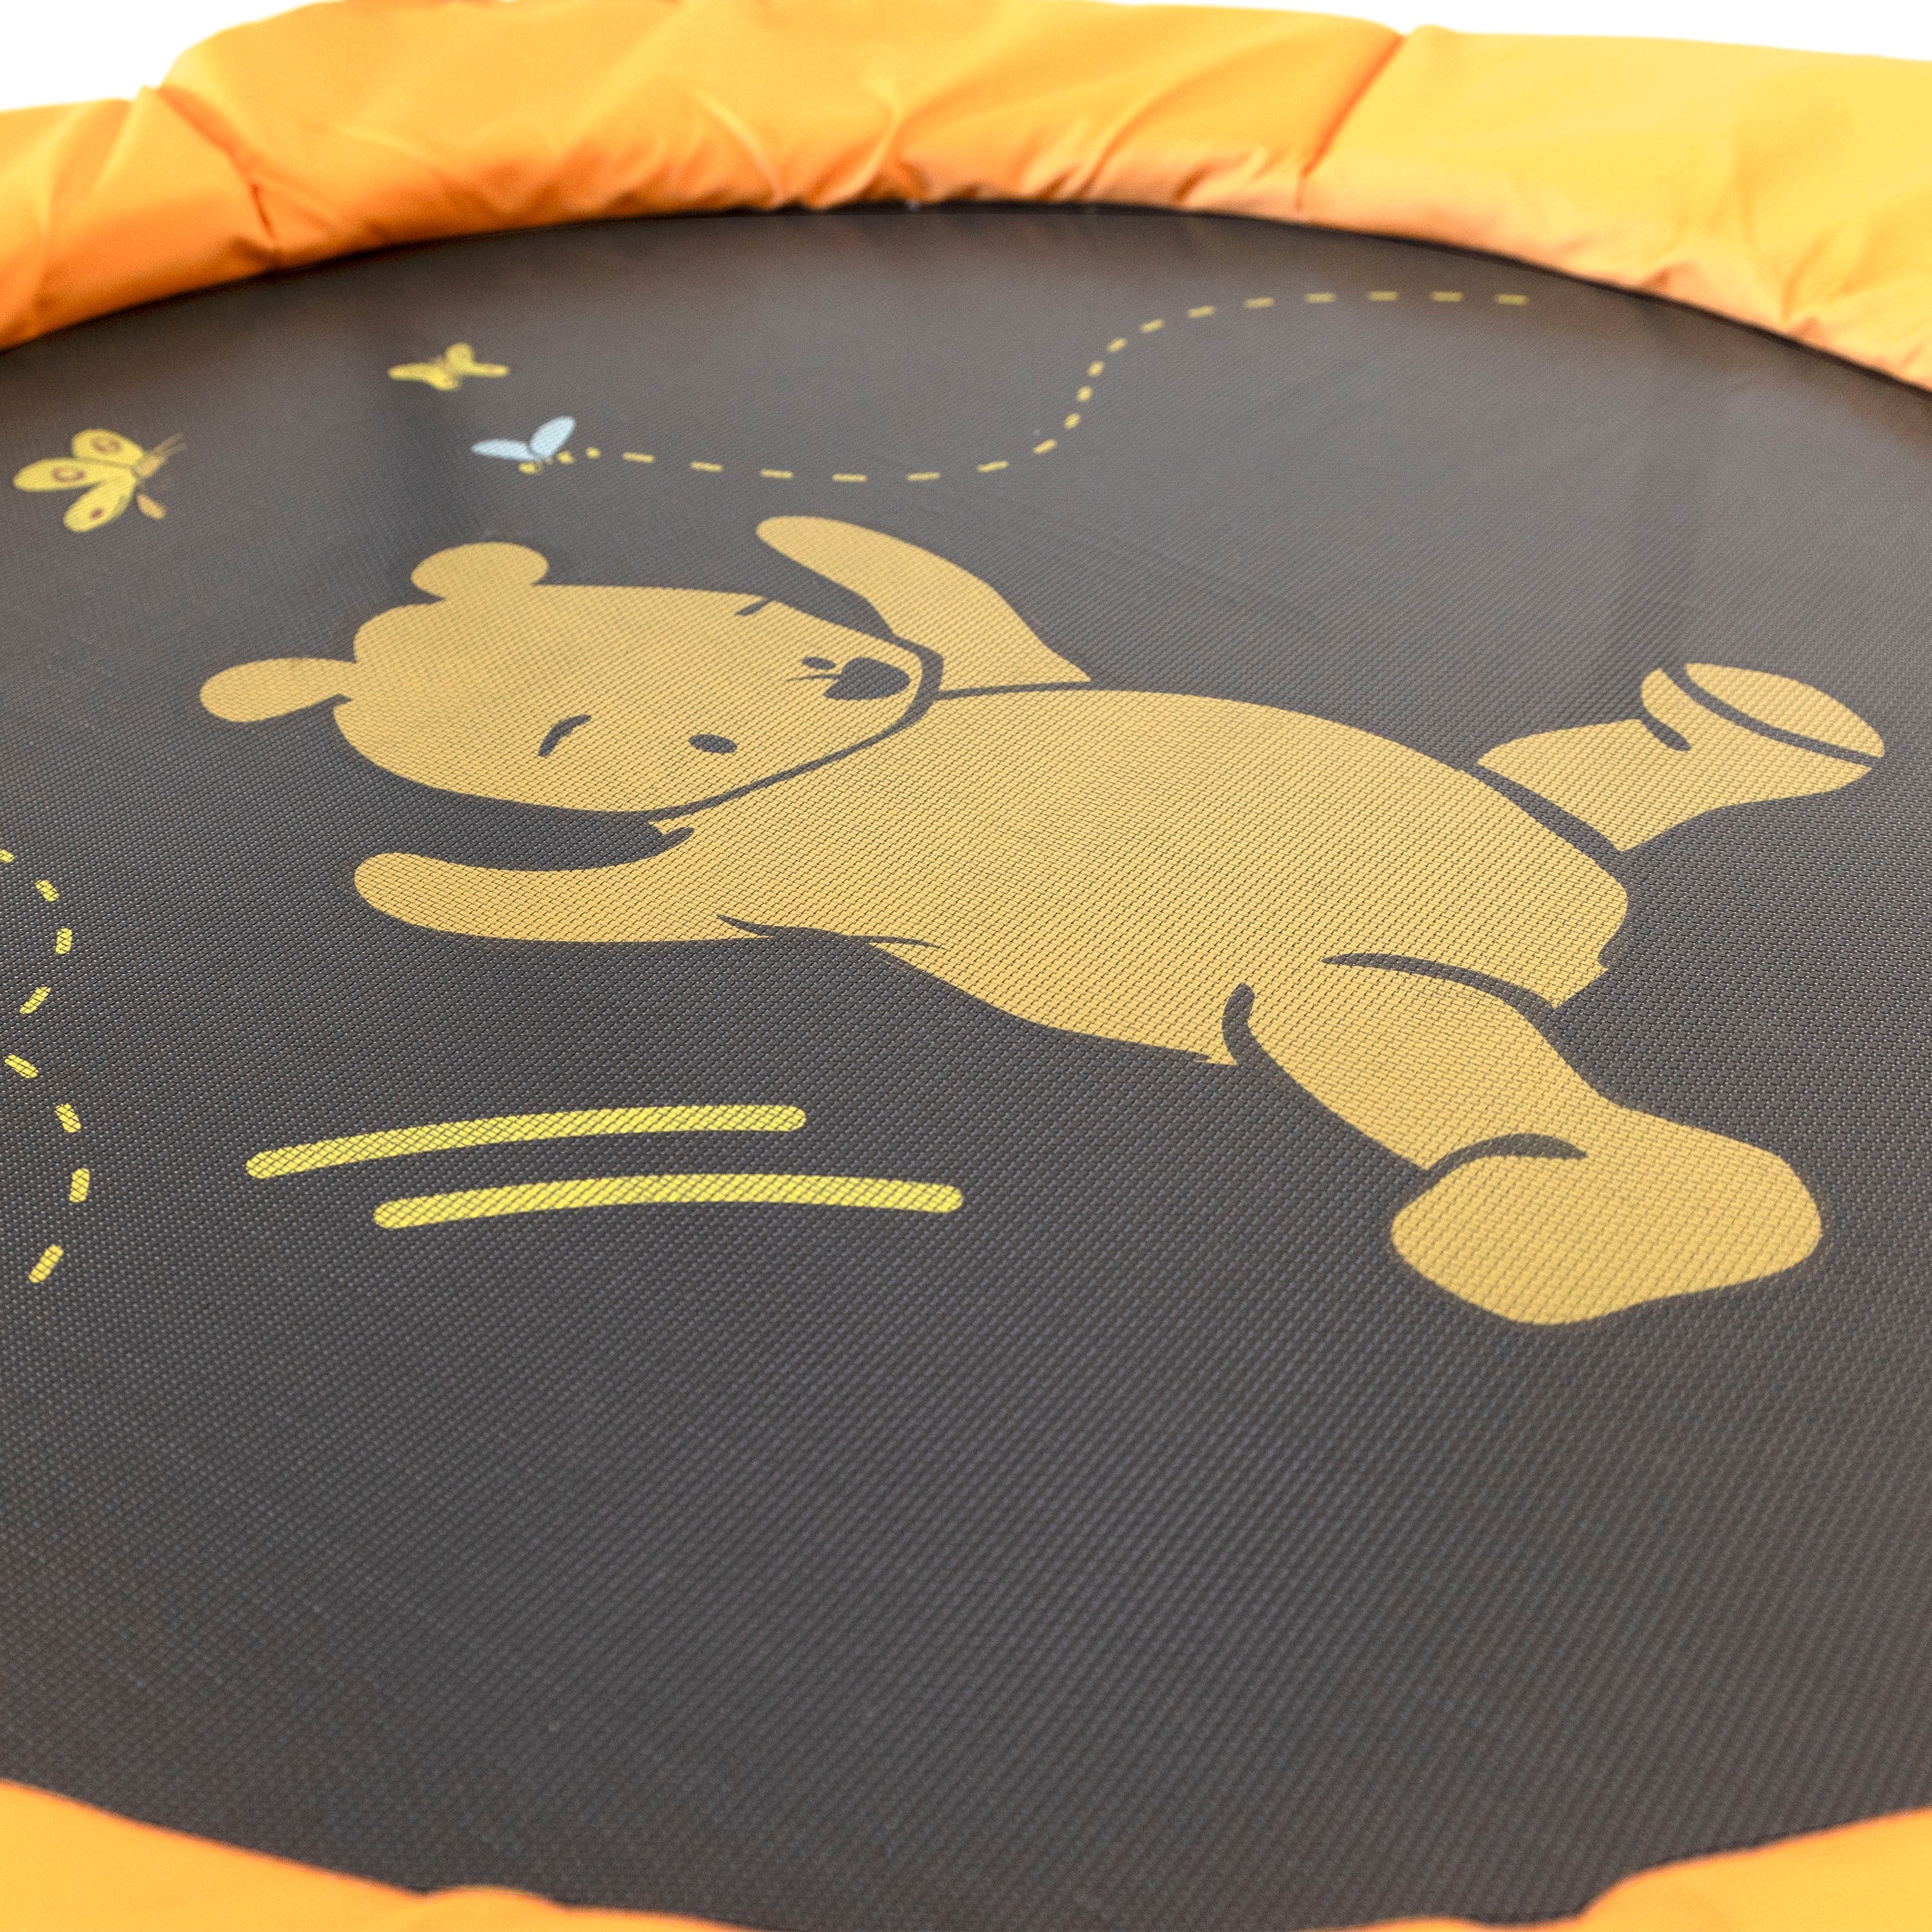 The yellow Winnie the Pooh character design is printed on the black jump mat with a yellow frame pad surrounding it. 